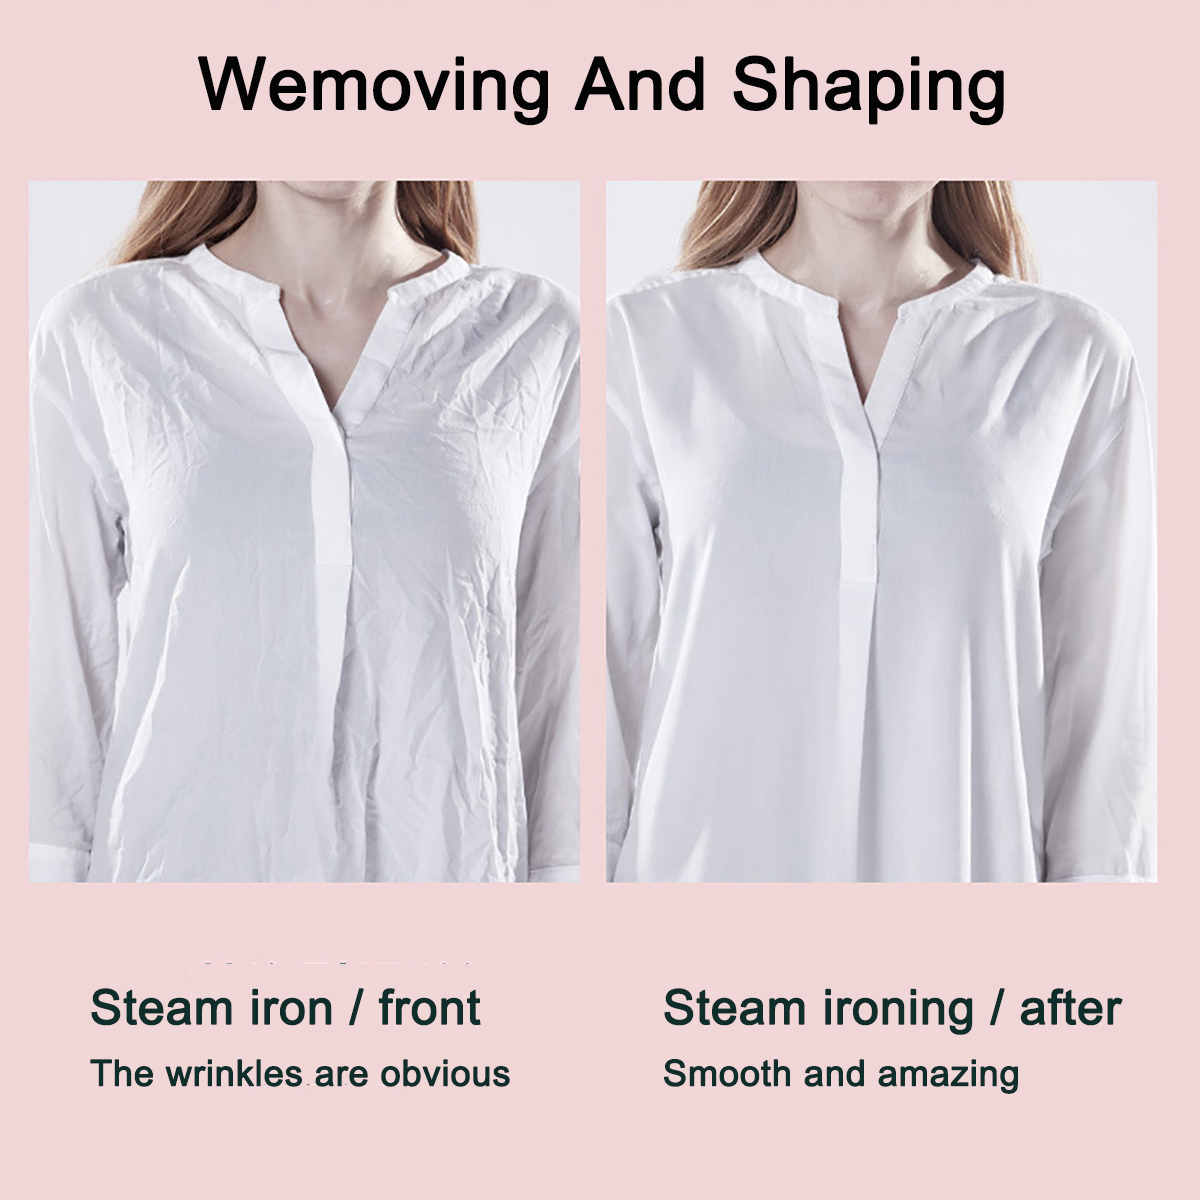 Portable-Garment-Steamer-1500W-Powerful-Clothes-Steam-Iron-Fast-Heat-up-Fabric-Wrinkle-Removal-320ml-1769367-3